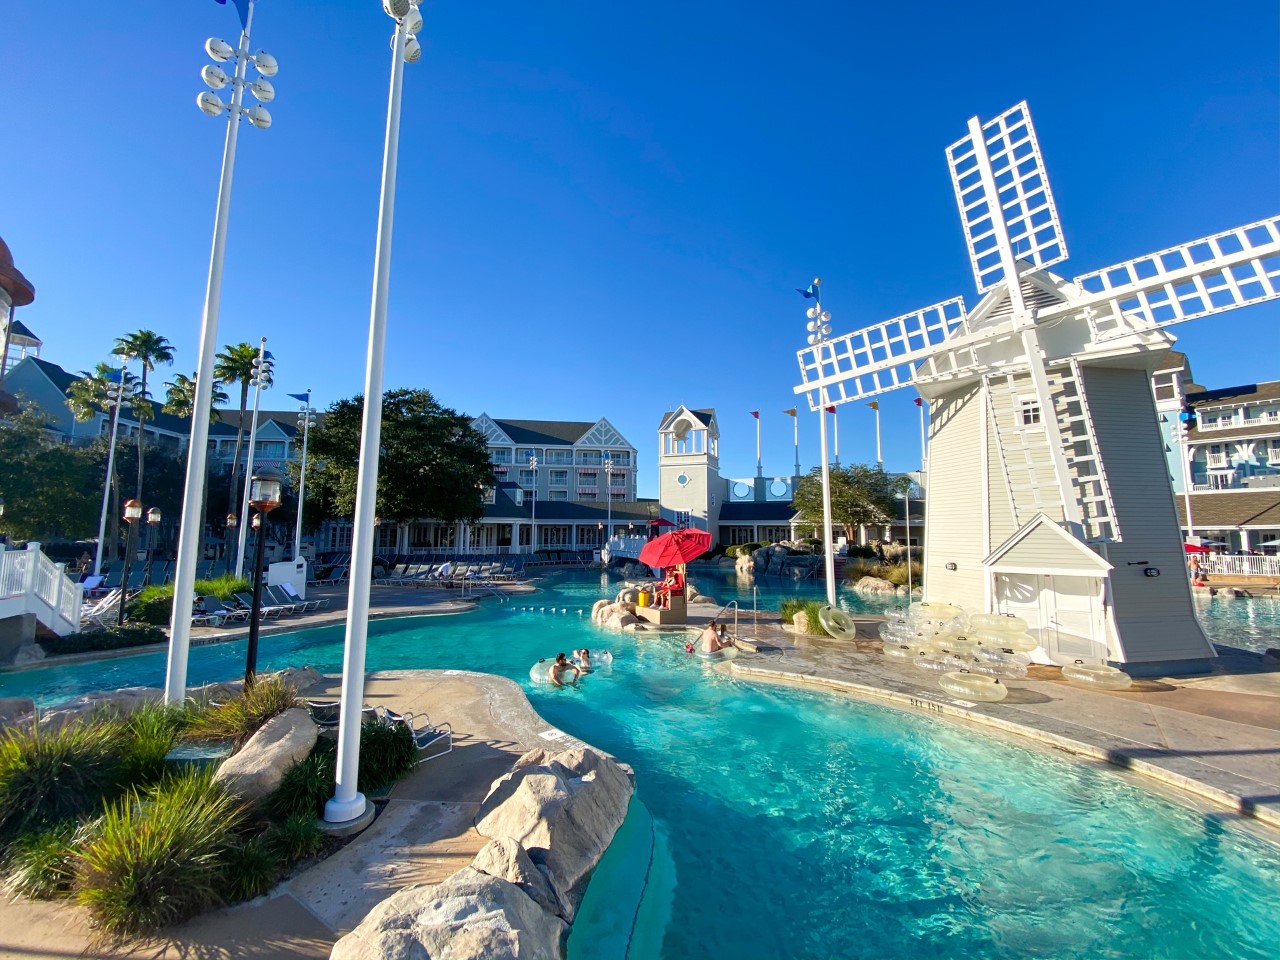 16 Best (and Worst!) Disney Resorts for Kids - Disney Trippers